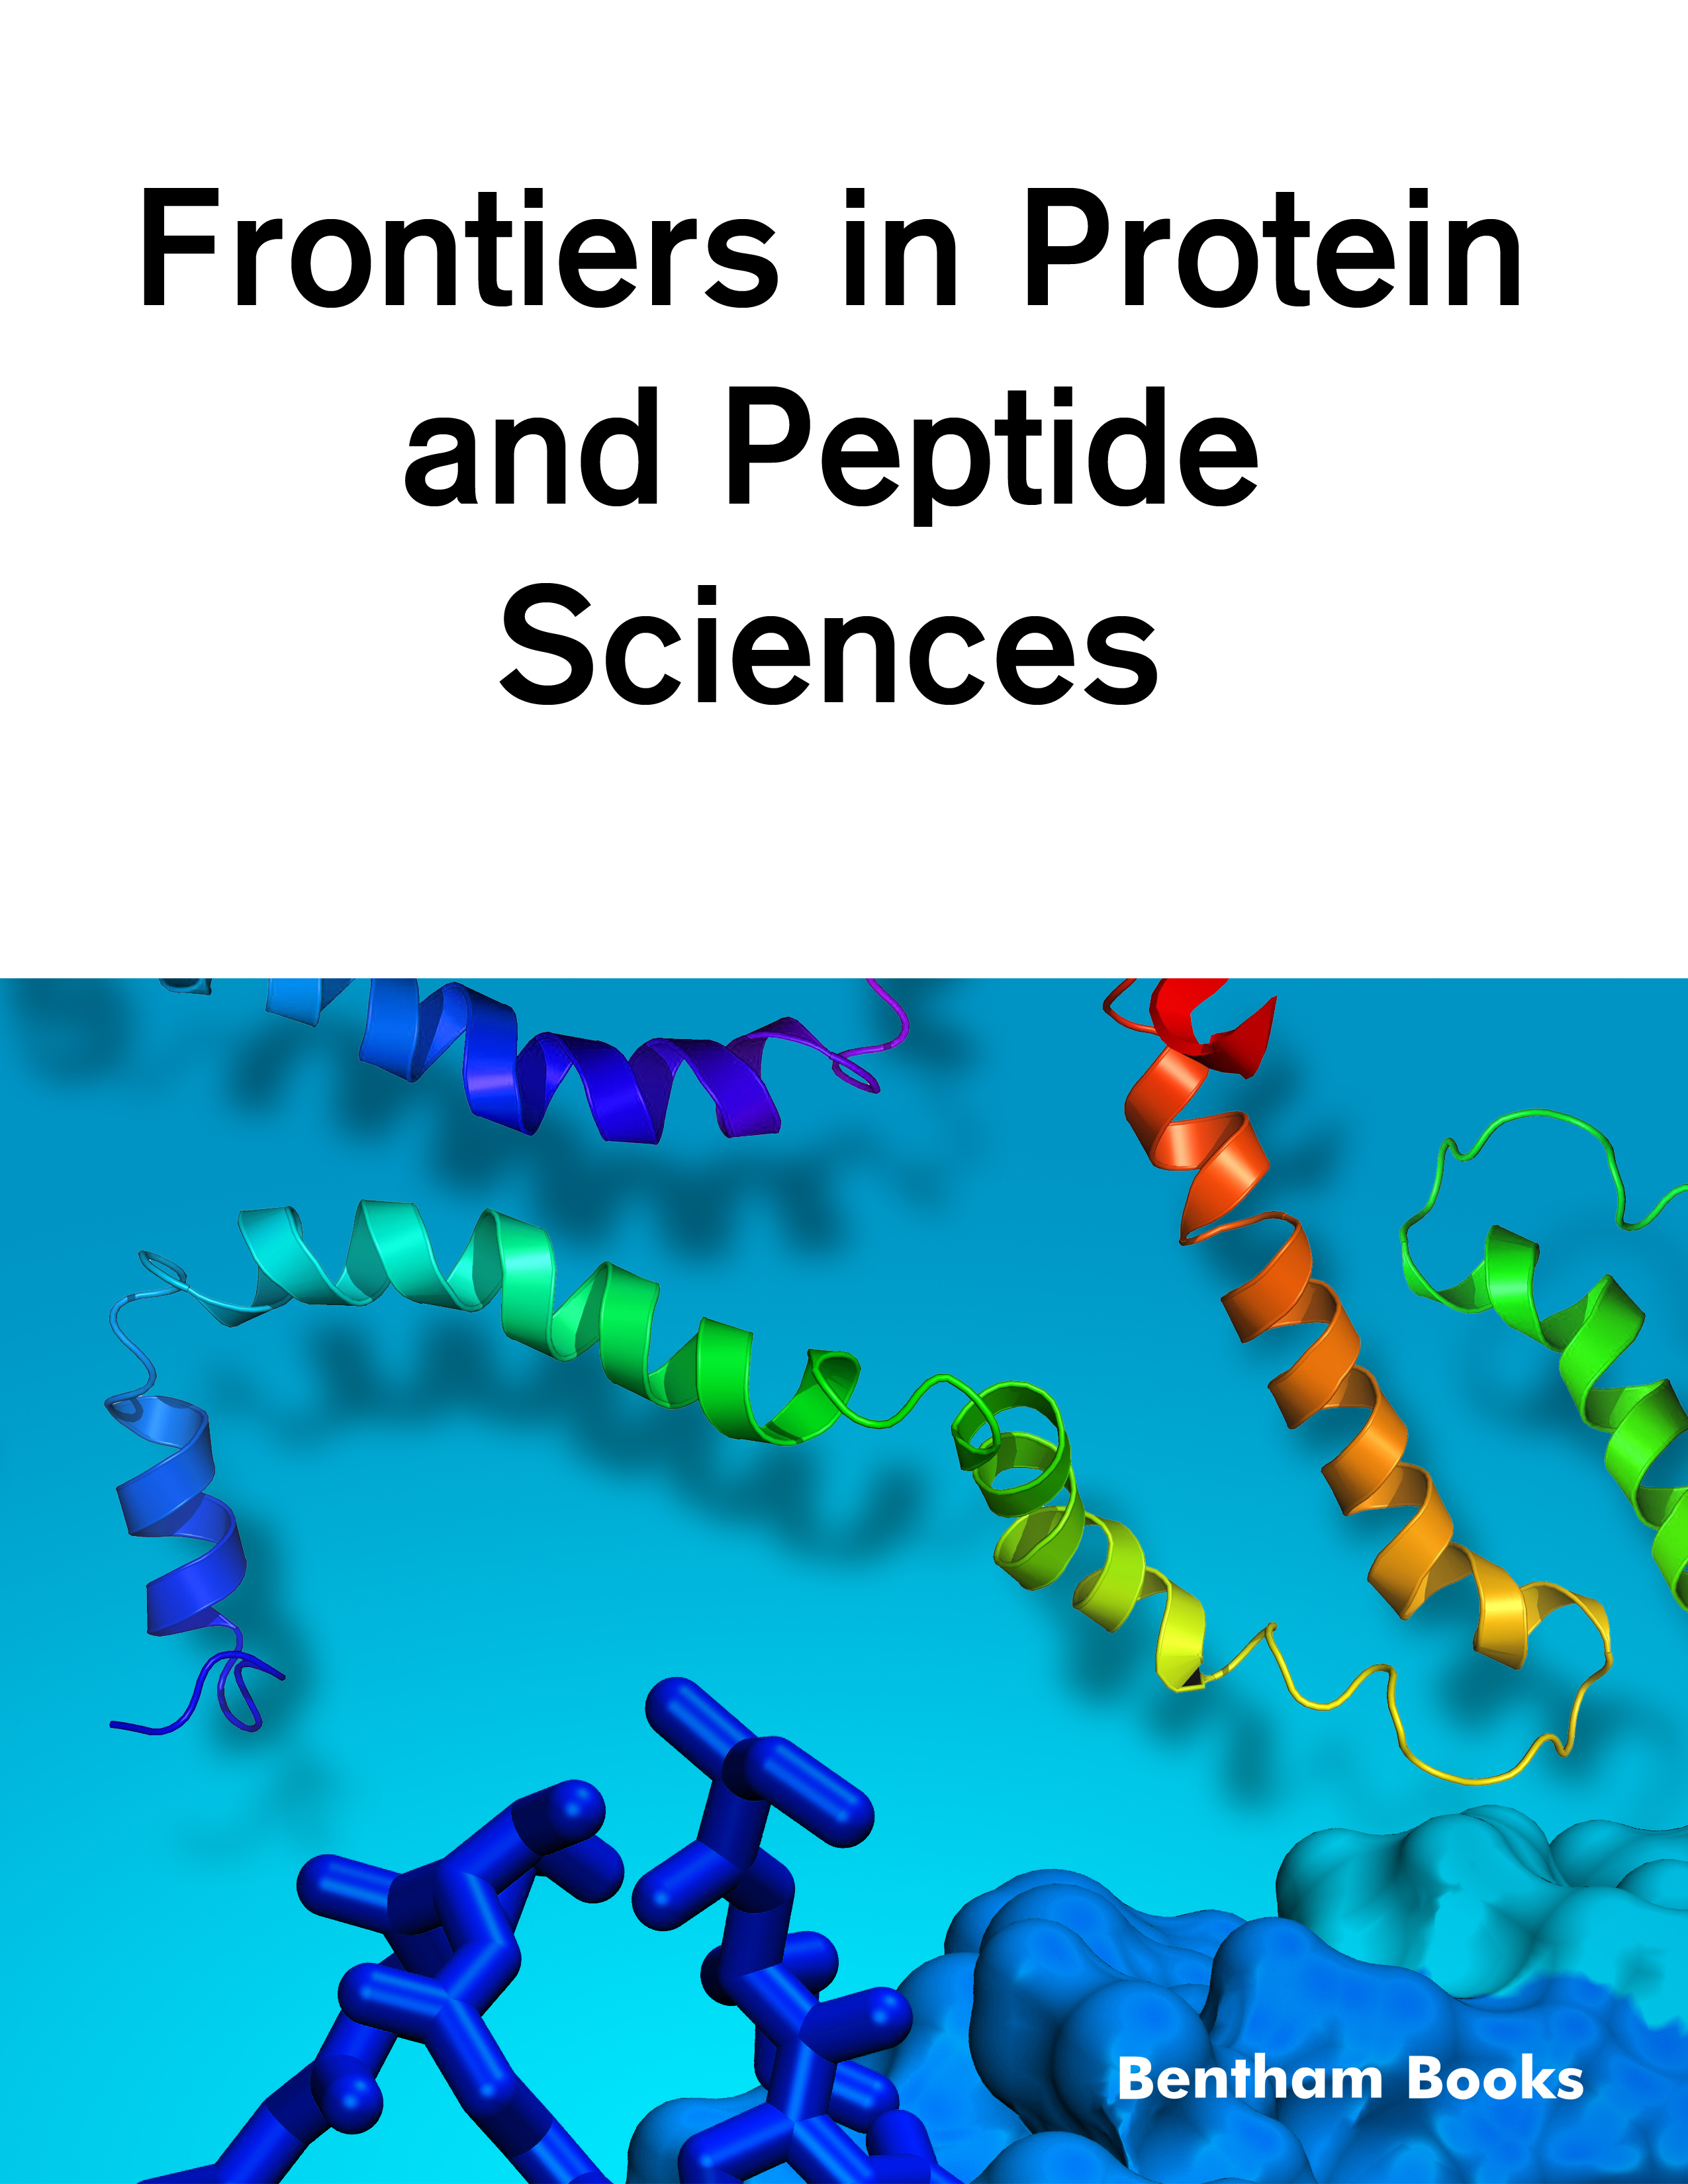 Frontiers in Protein and Peptide Sciences